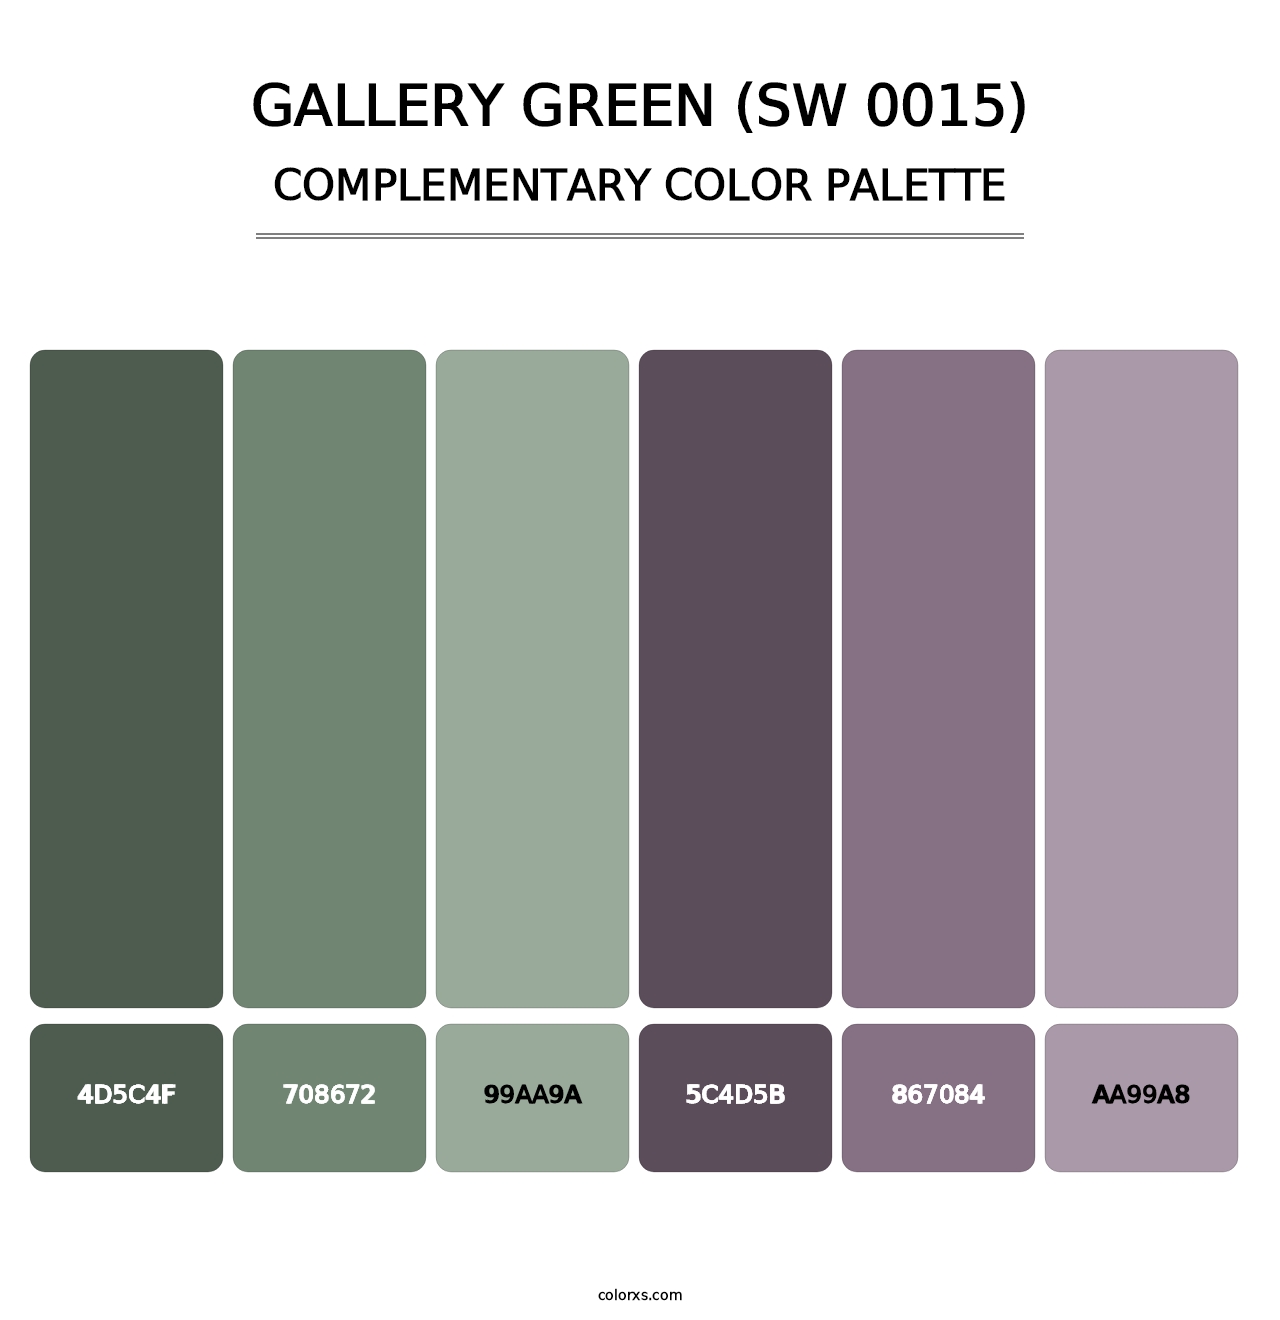 Gallery Green (SW 0015) - Complementary Color Palette